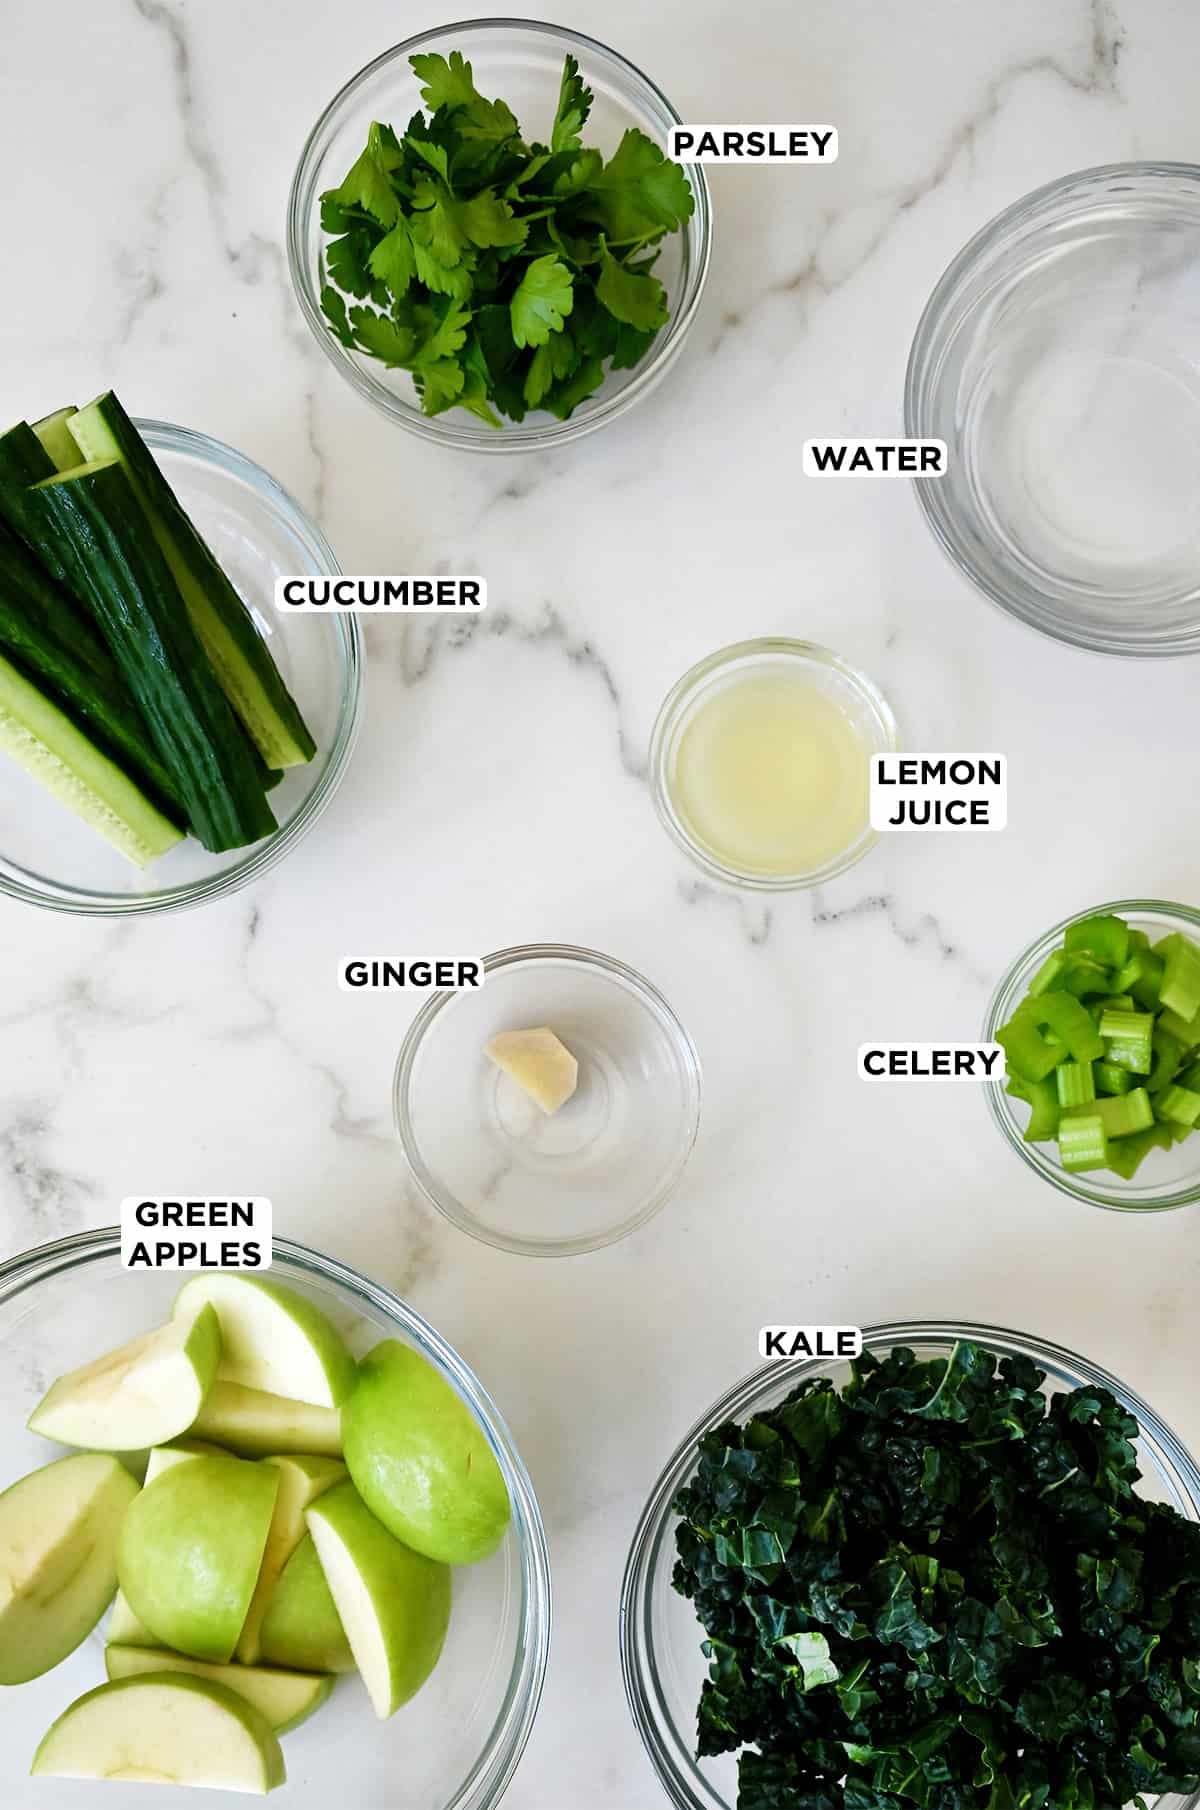 Glass bowls are filled with all the ingredients for green juice, including apples, kale, ginger, celery, parsley, cucumber and water.